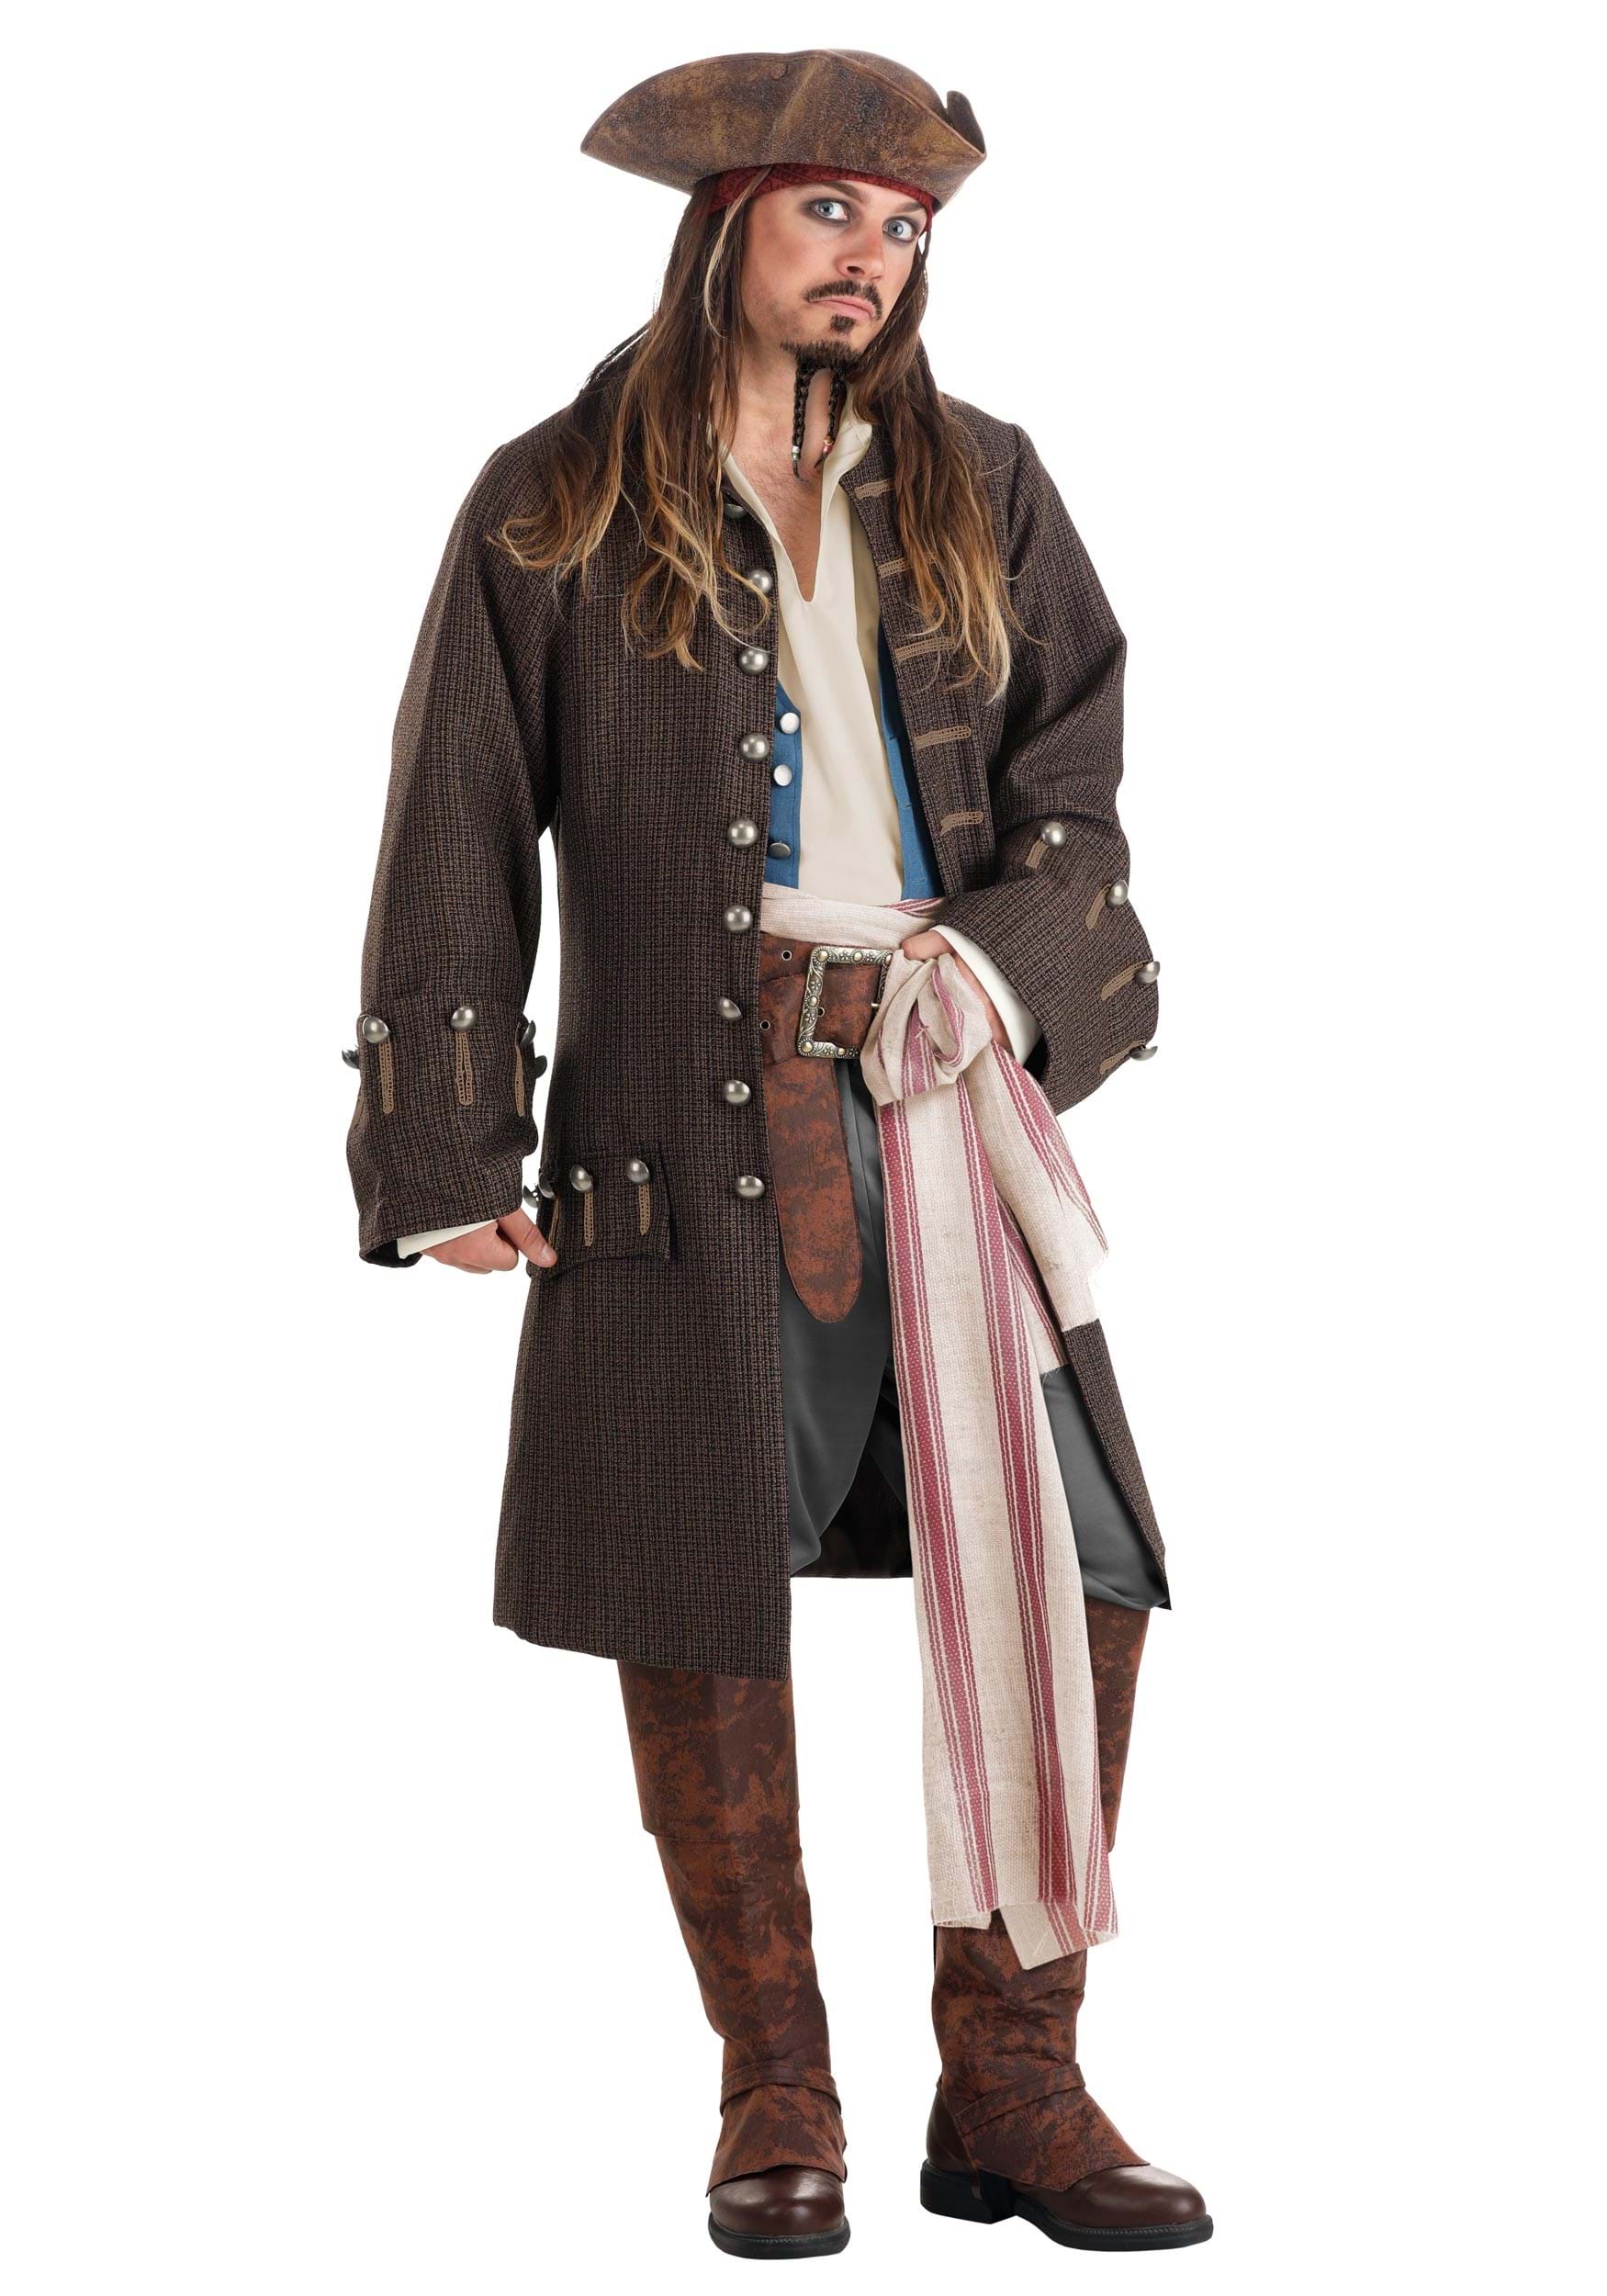 Photos - Fancy Dress Deluxe FUN Costumes  Jack Sparrow Pirate Mens Costume Brown/Gray FUN190 